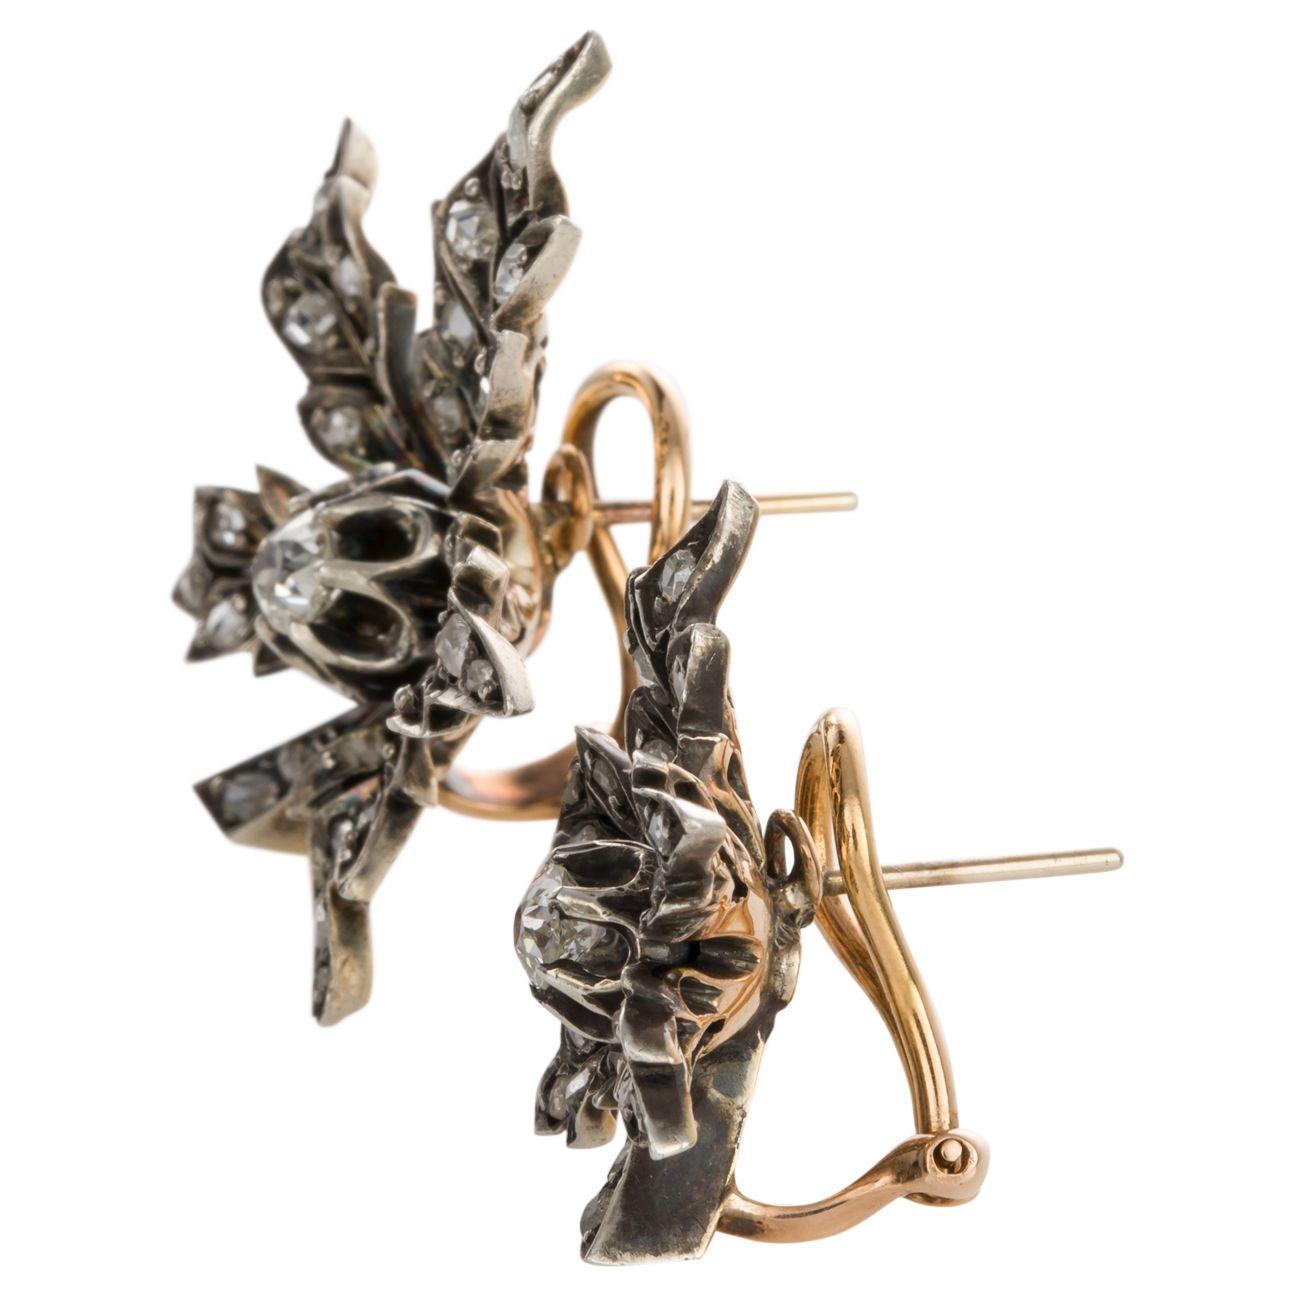 Everything old is new again! These wonderful 'mismatched' antique components from the 1880's have a new life as a unique pair of pierced earrings. Once belonging to a larger ensemble of jewels, the two leaf components have been transported into the